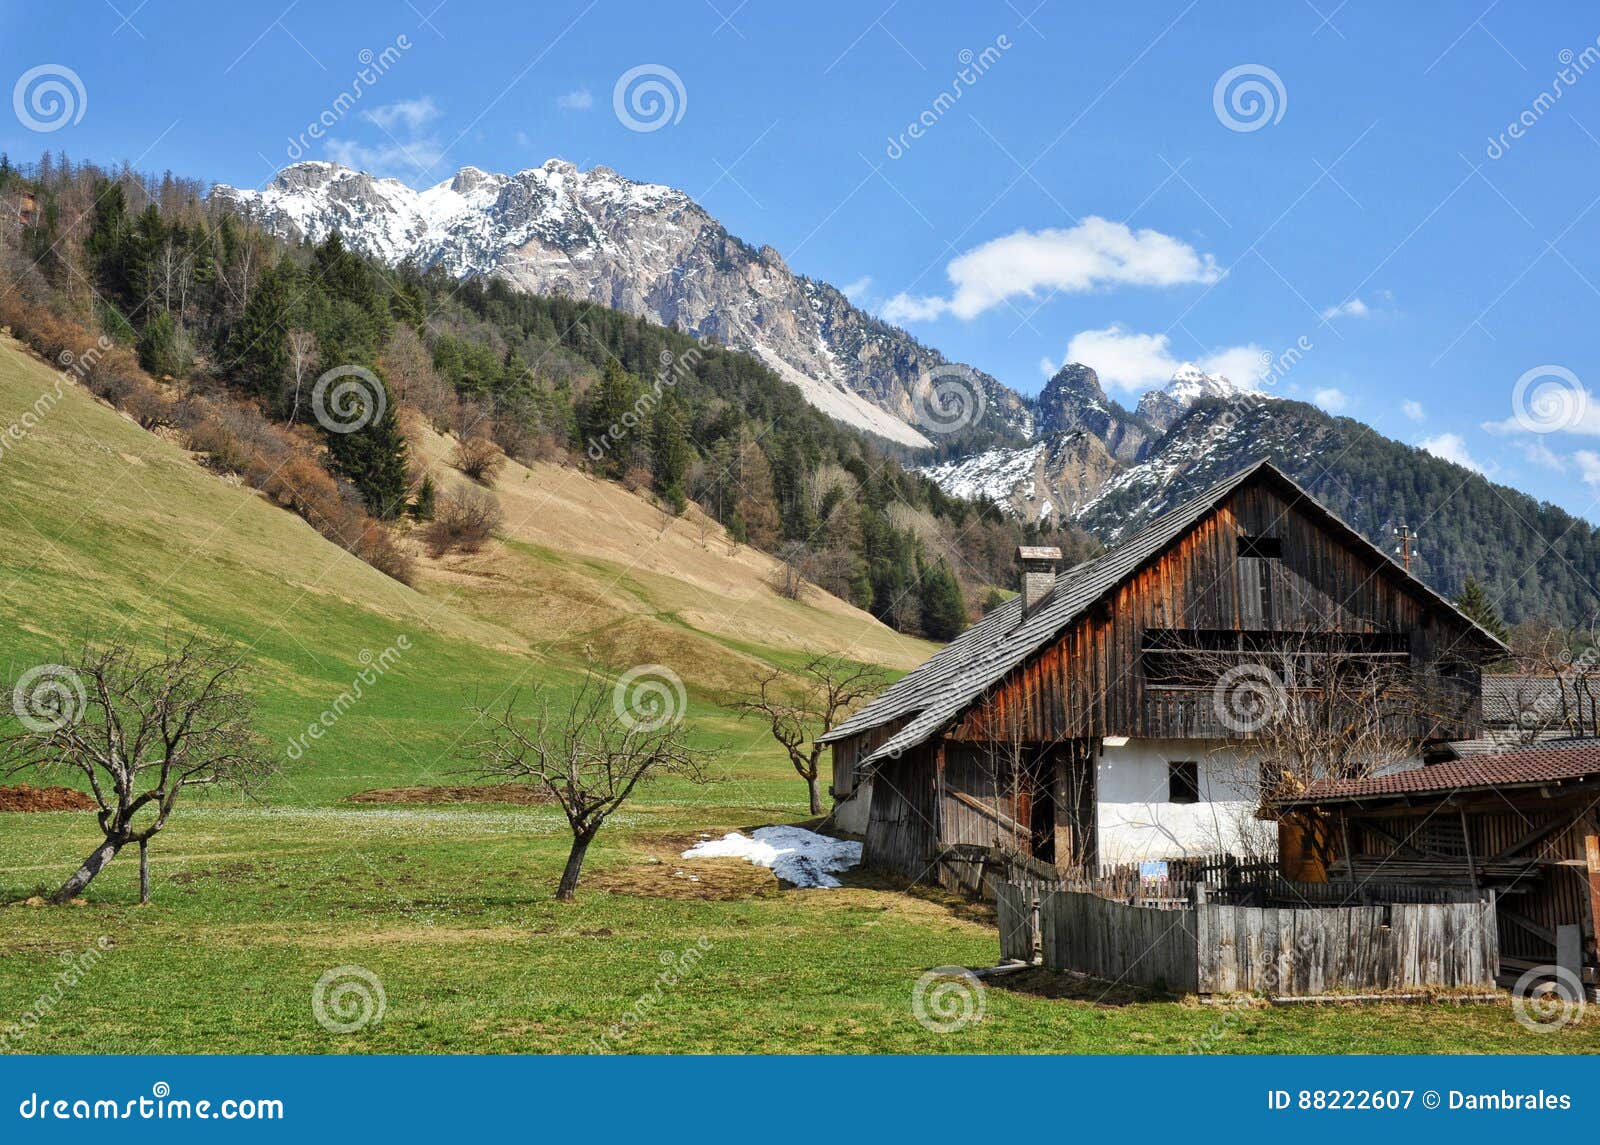 landscape of dolomites mountains in summer with a farm and meadows